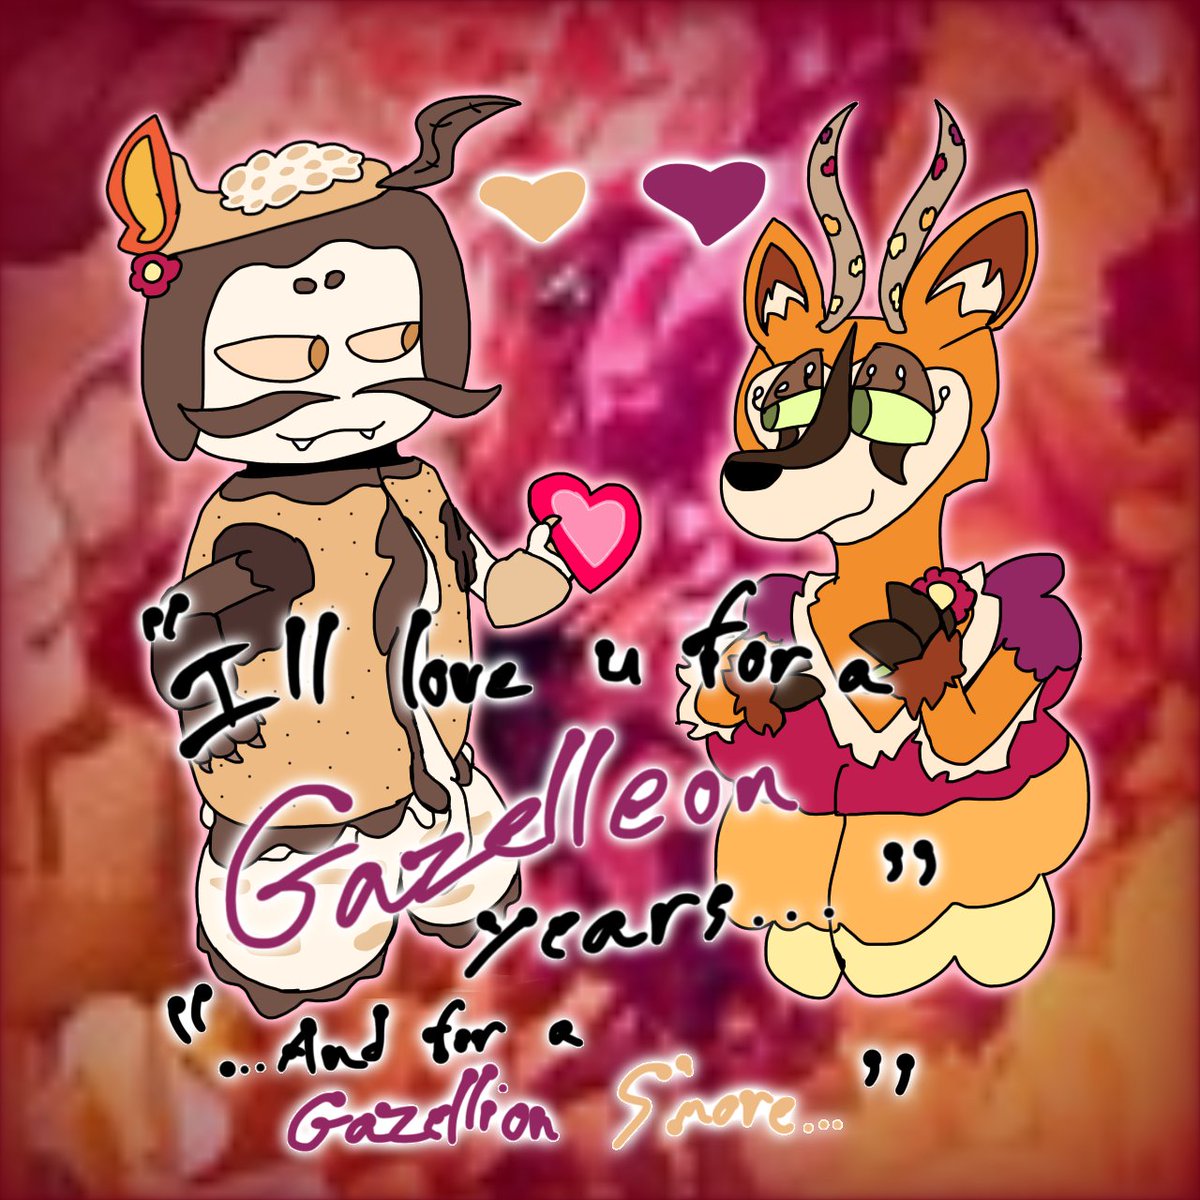 Me when a ship of a s’more and gazelle

Anyways, Happy Valentines Day 🍫❤️🦌
#TheMaskedSinger #SmoreMask #GazelleMask